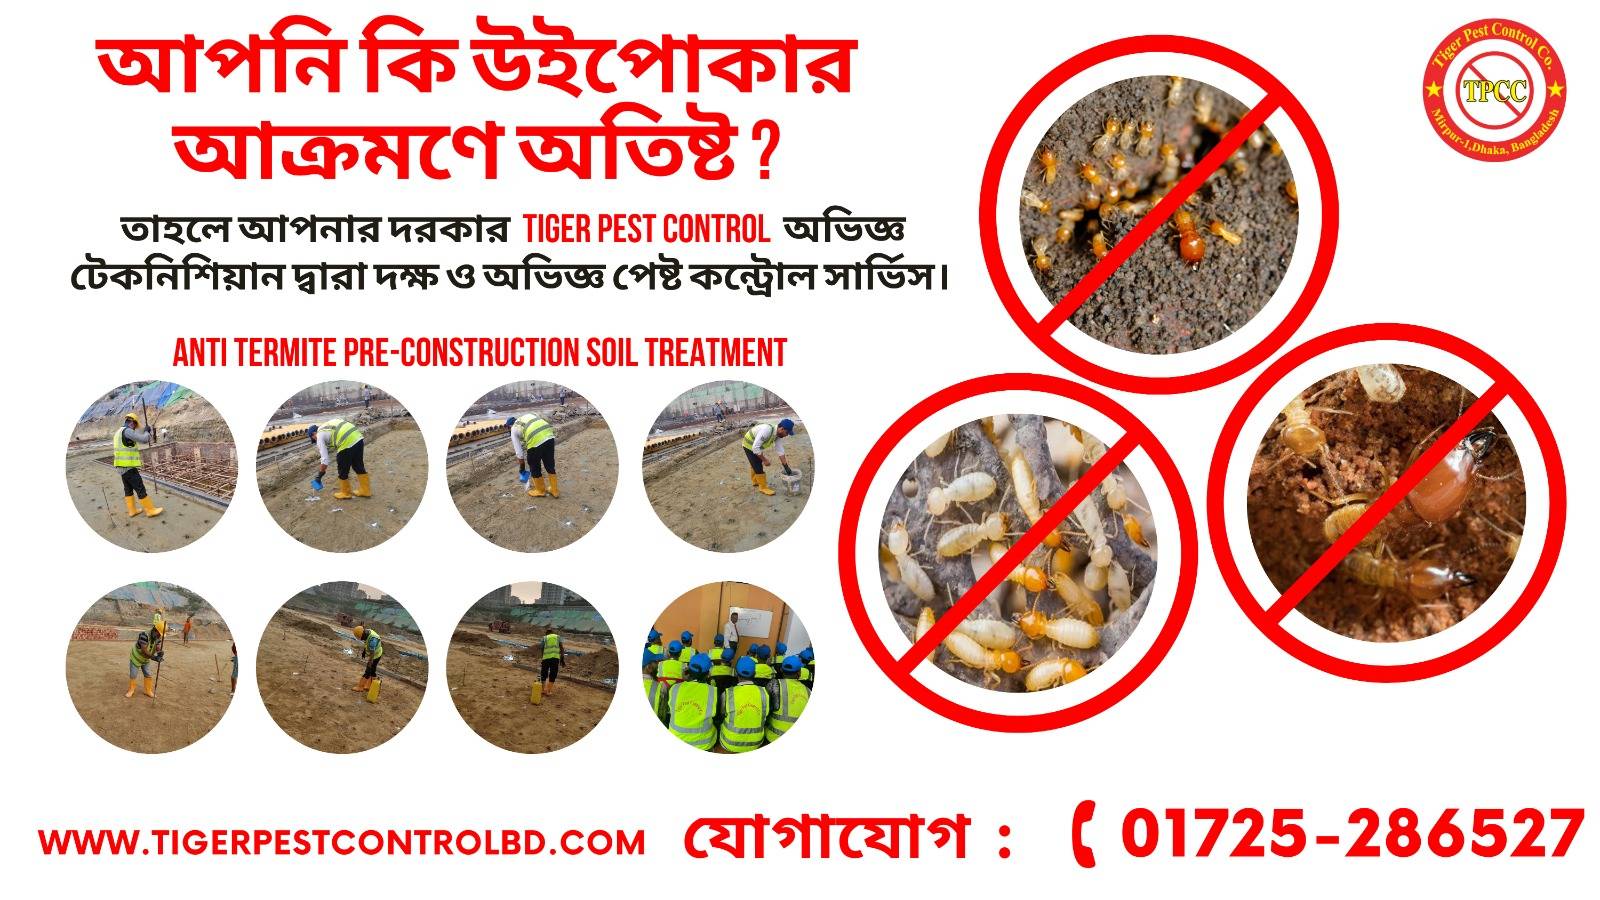 Bedbugs control services in Dhaka